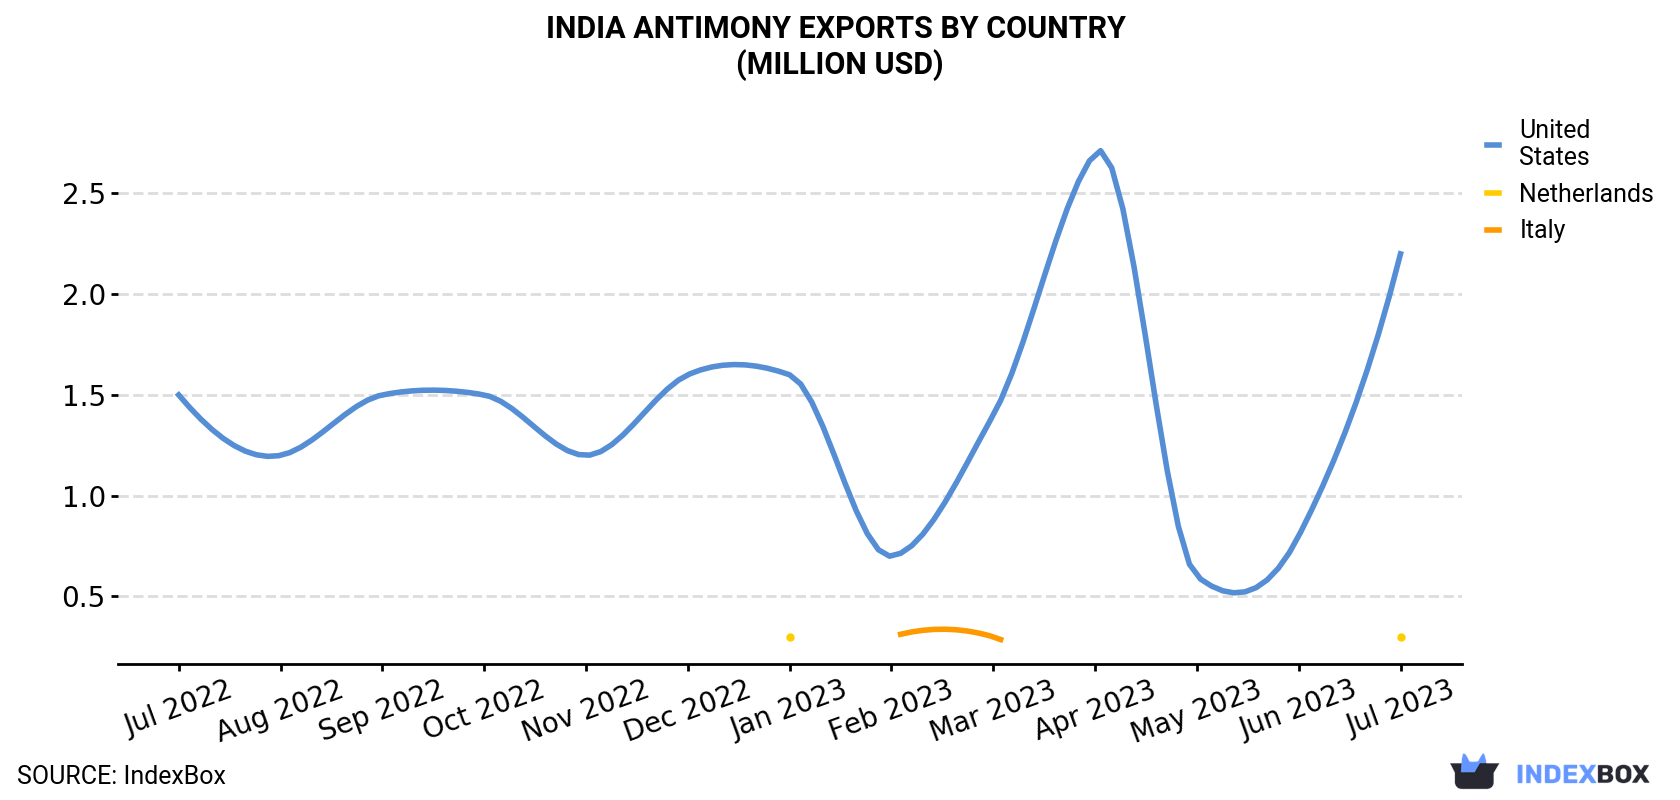 India Antimony Exports By Country (Million USD)